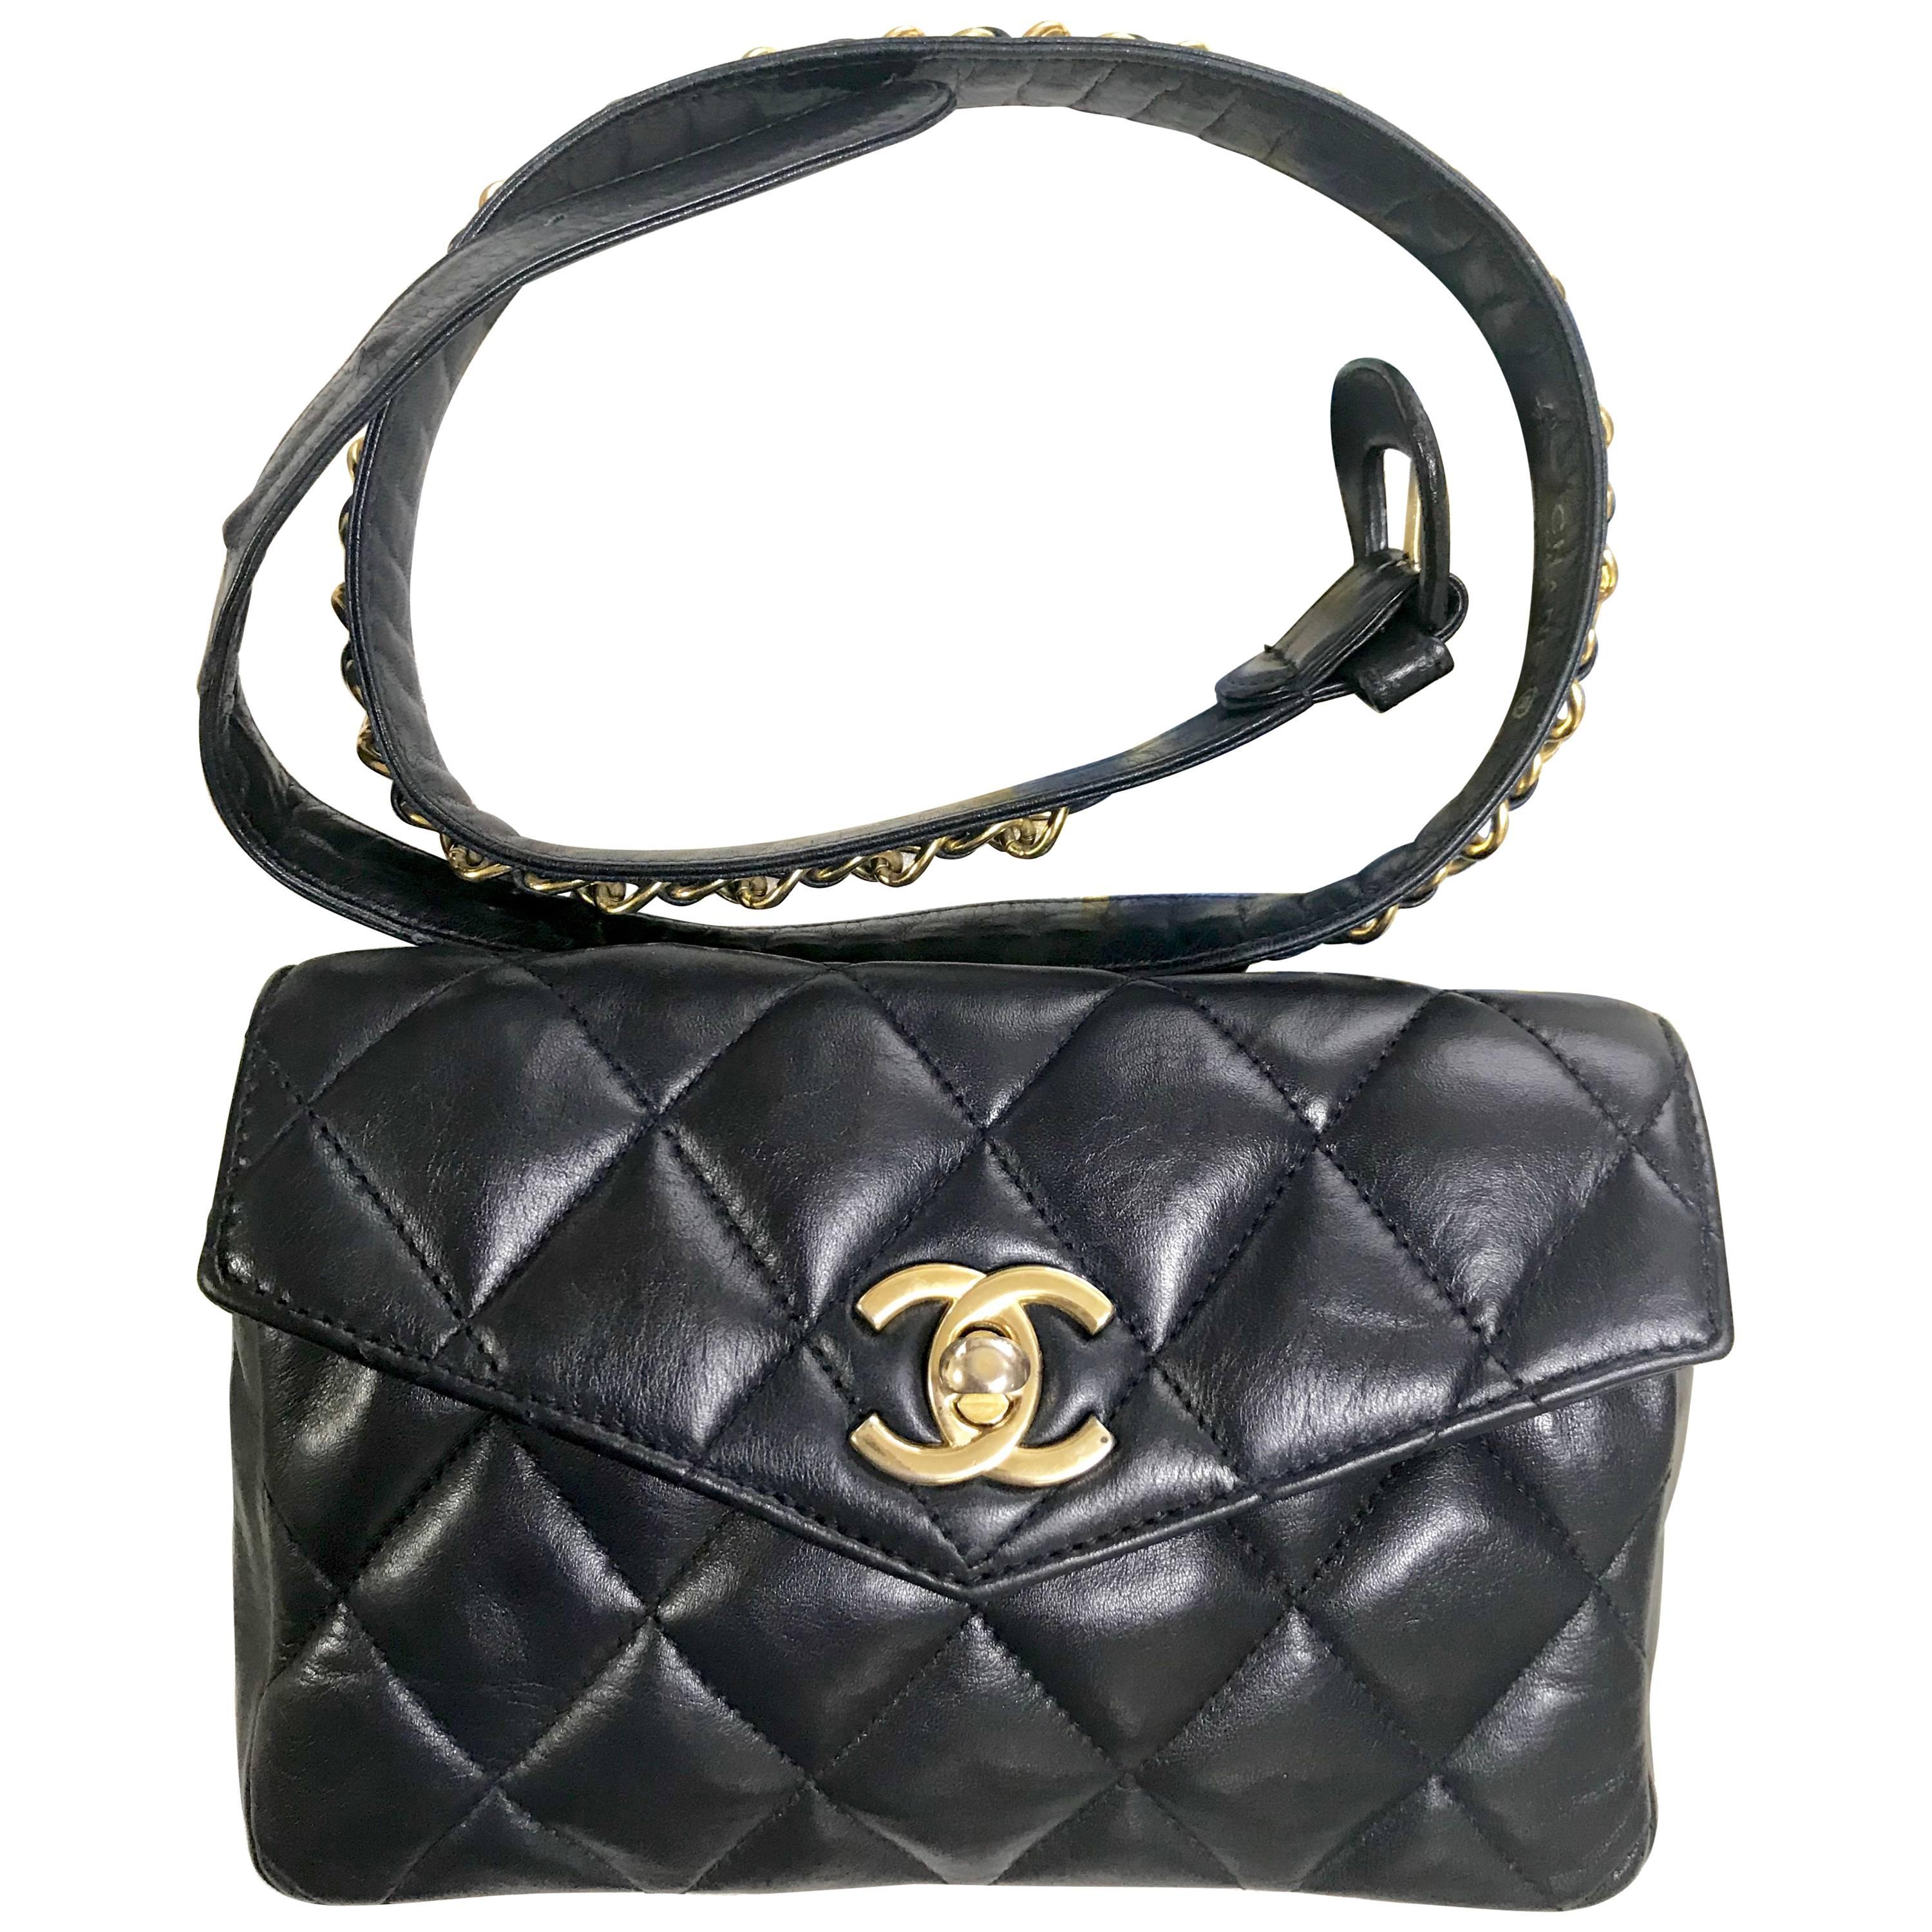 Vintage CHANEL dark navy lamb leather waist bag, fanny pack with golden chains. For Sale